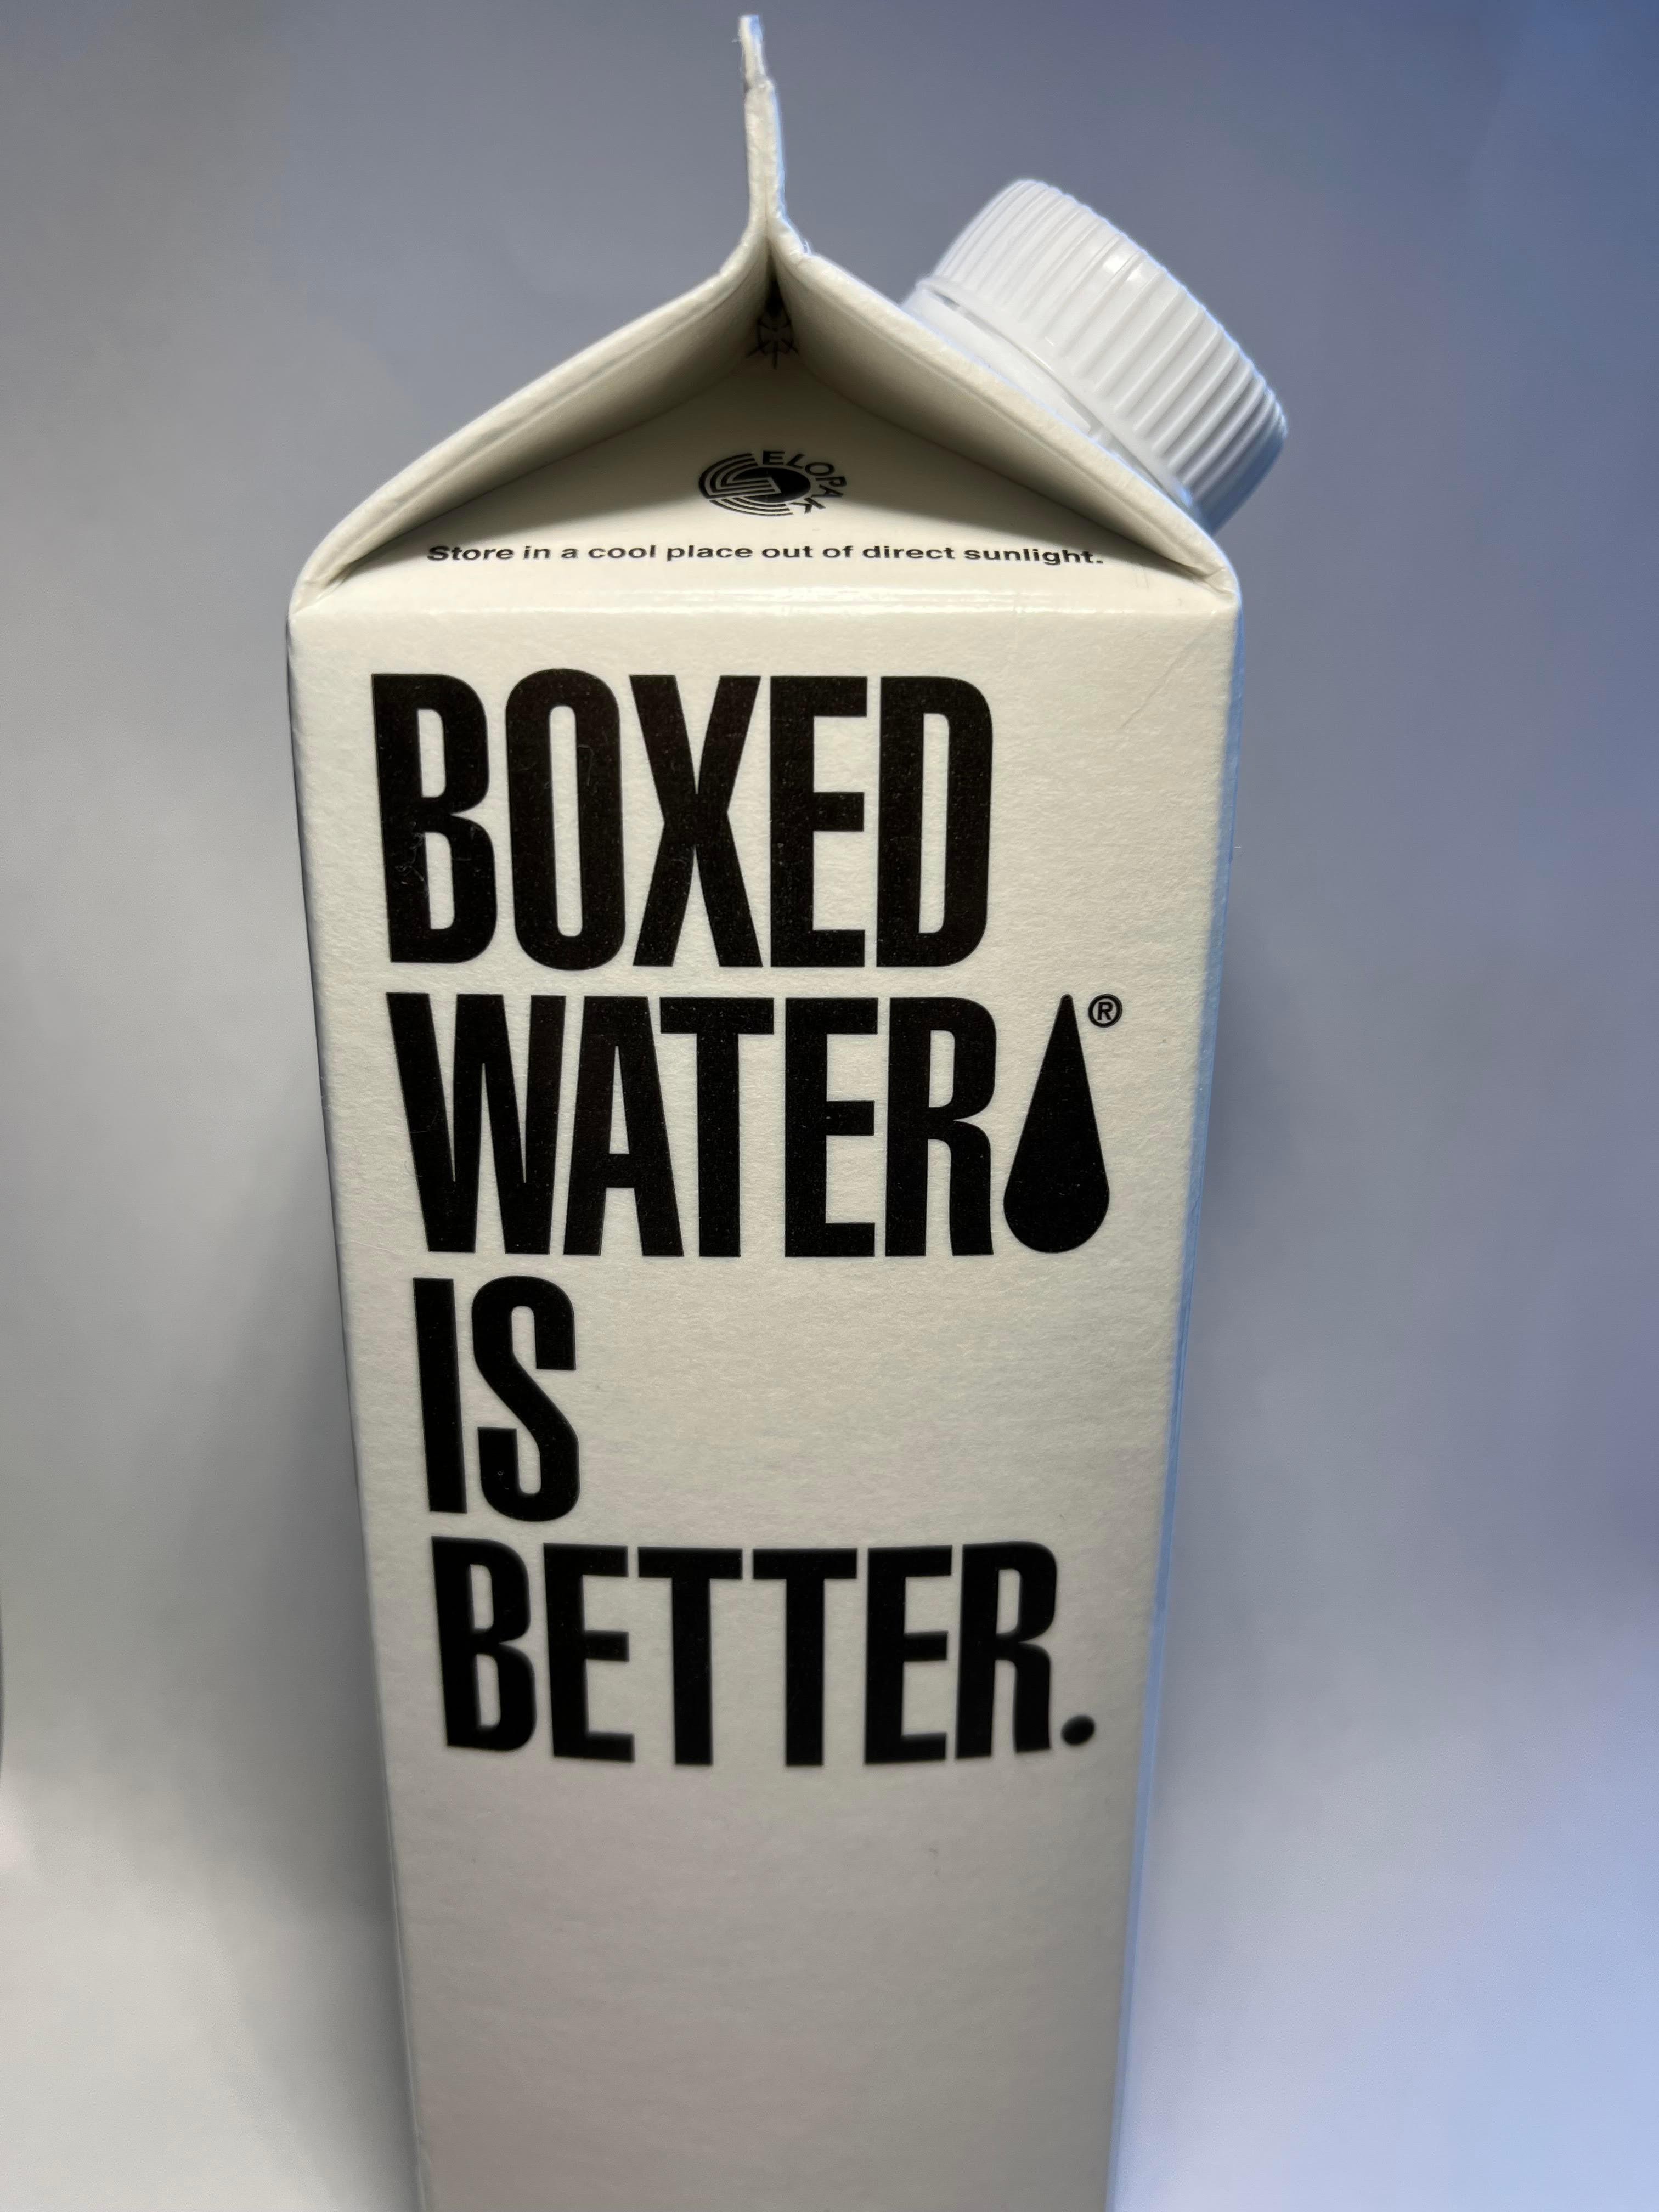 BOXED WATER 500ml